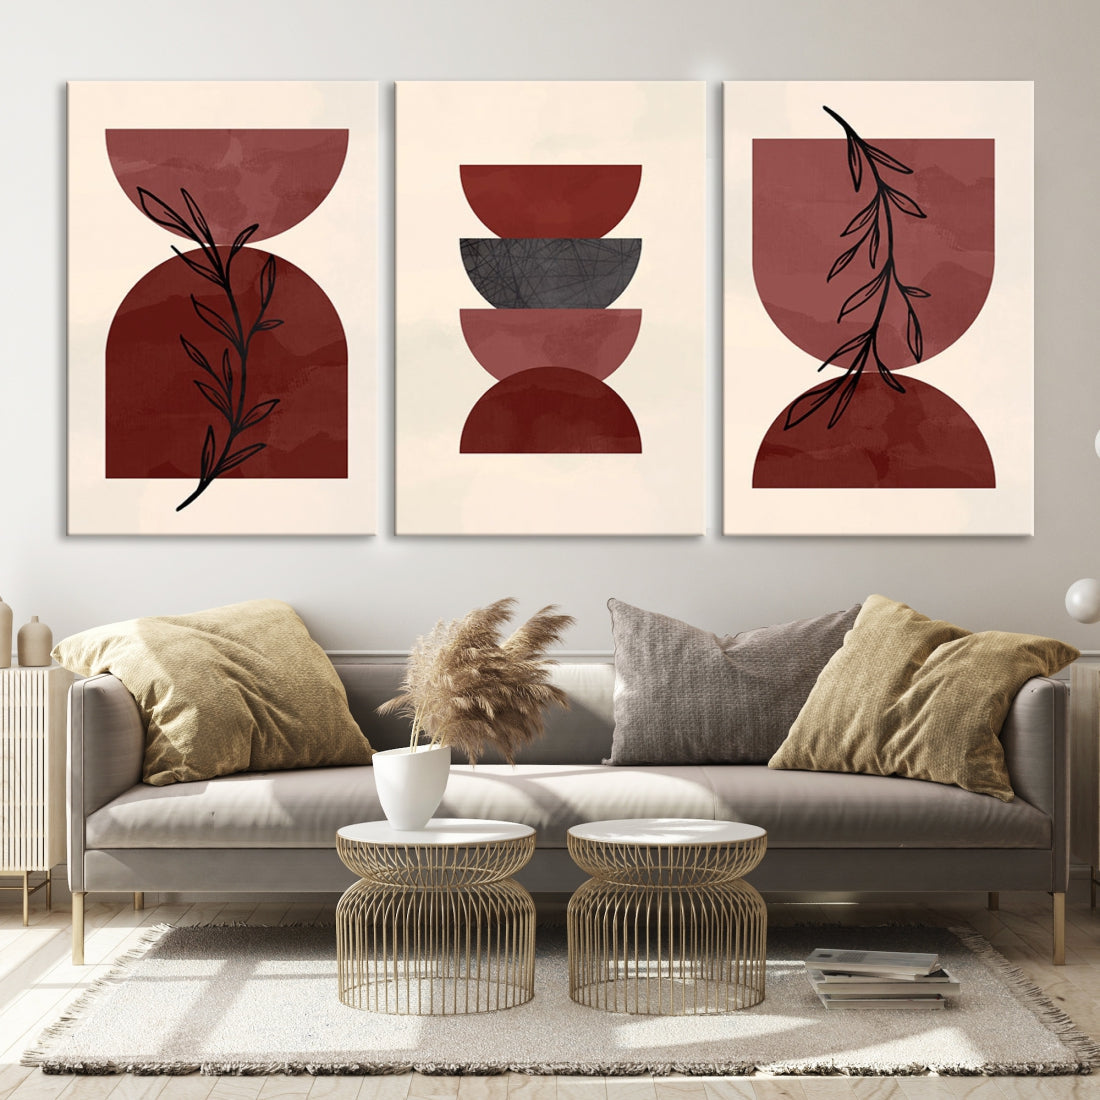 Boho Red Circles and Floral Wall Art Canvas Print for Living Room Decor